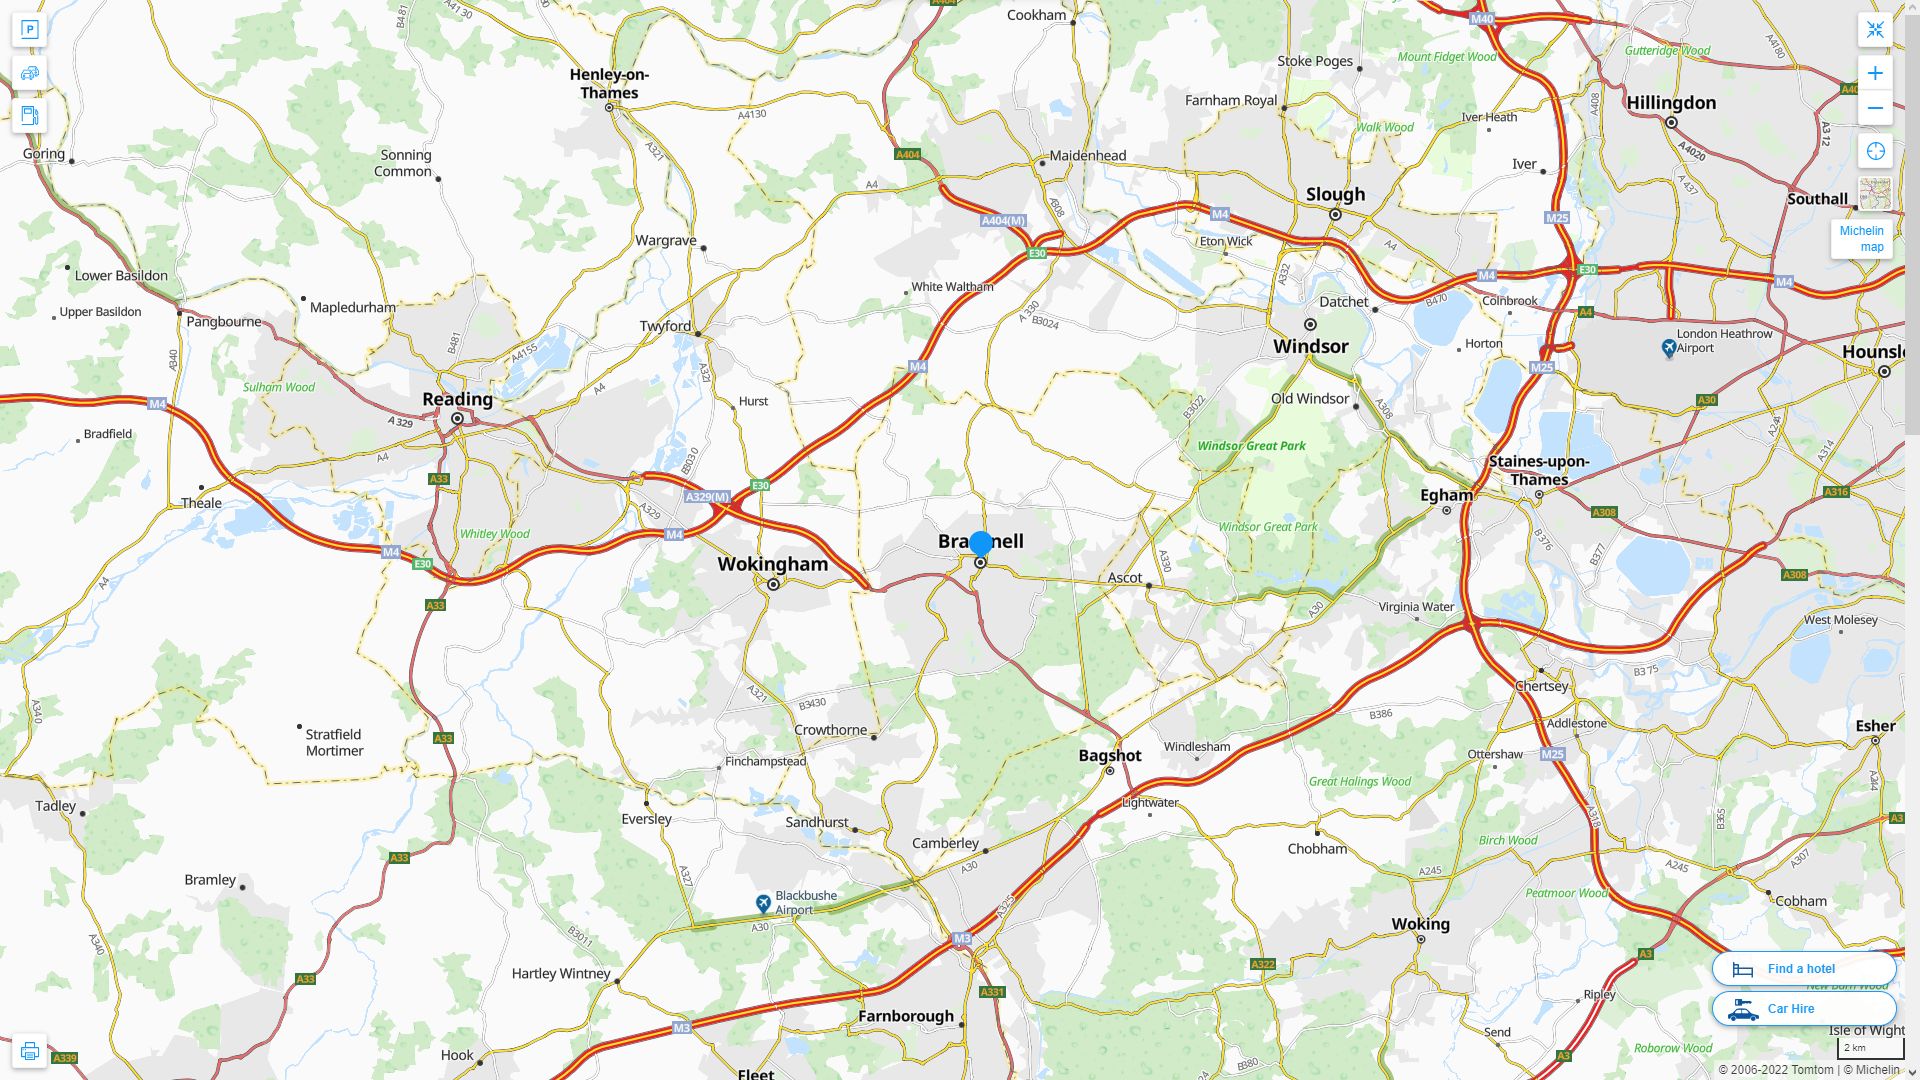 Bracknell Highway and Road Map